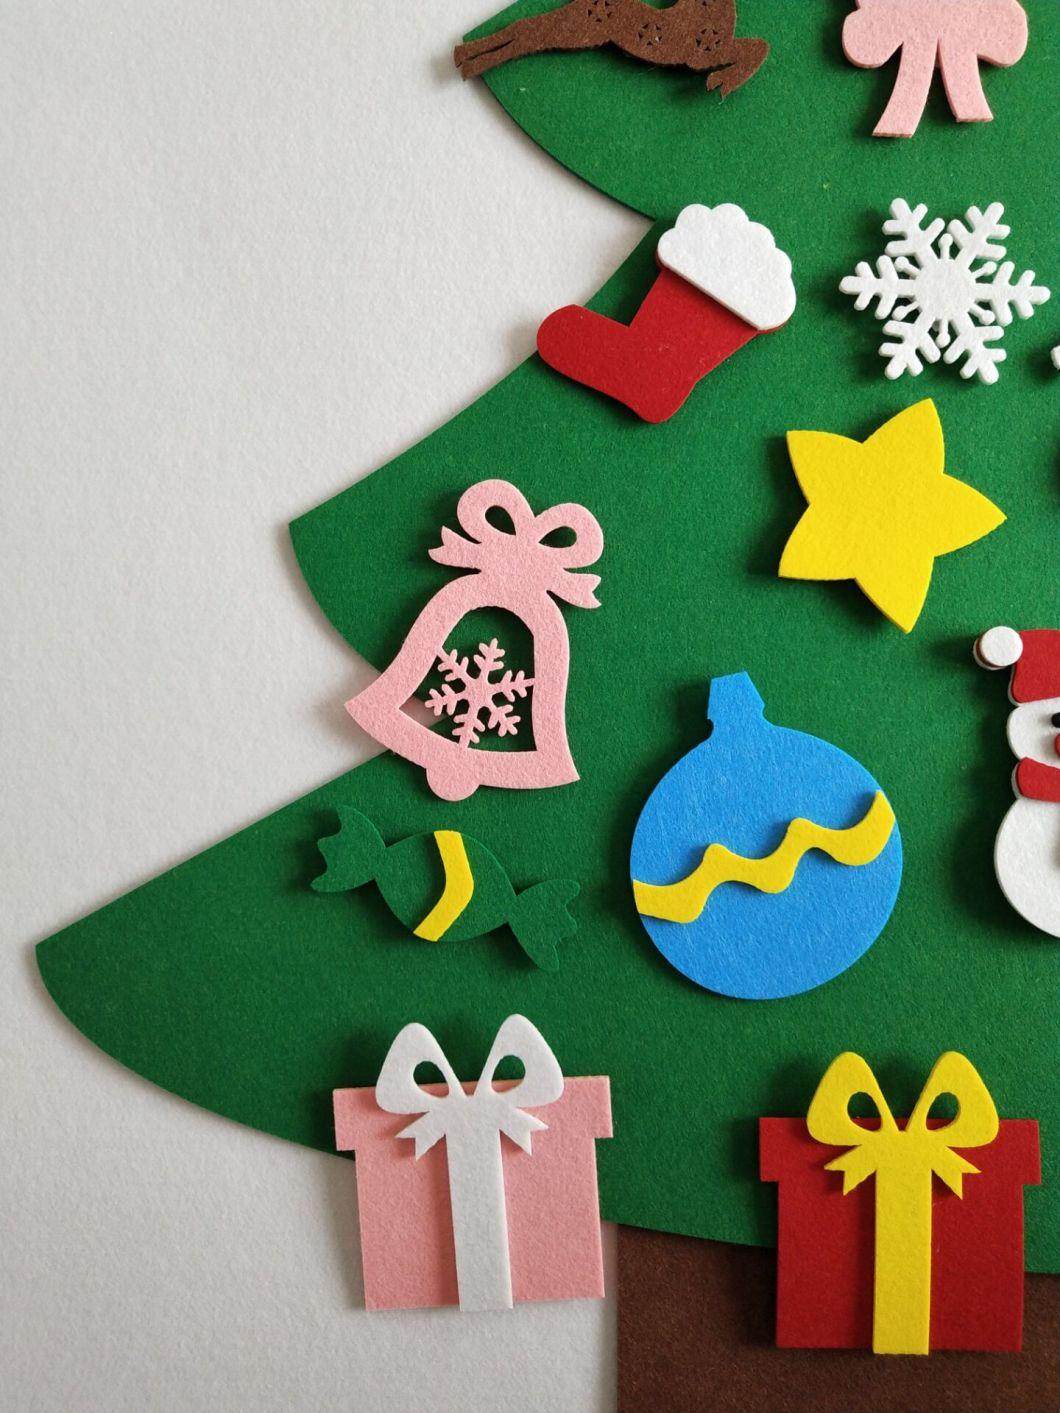 DIY Felt Christmas Tree with Detachable Ornaments Xmas Gifts for Toddlers